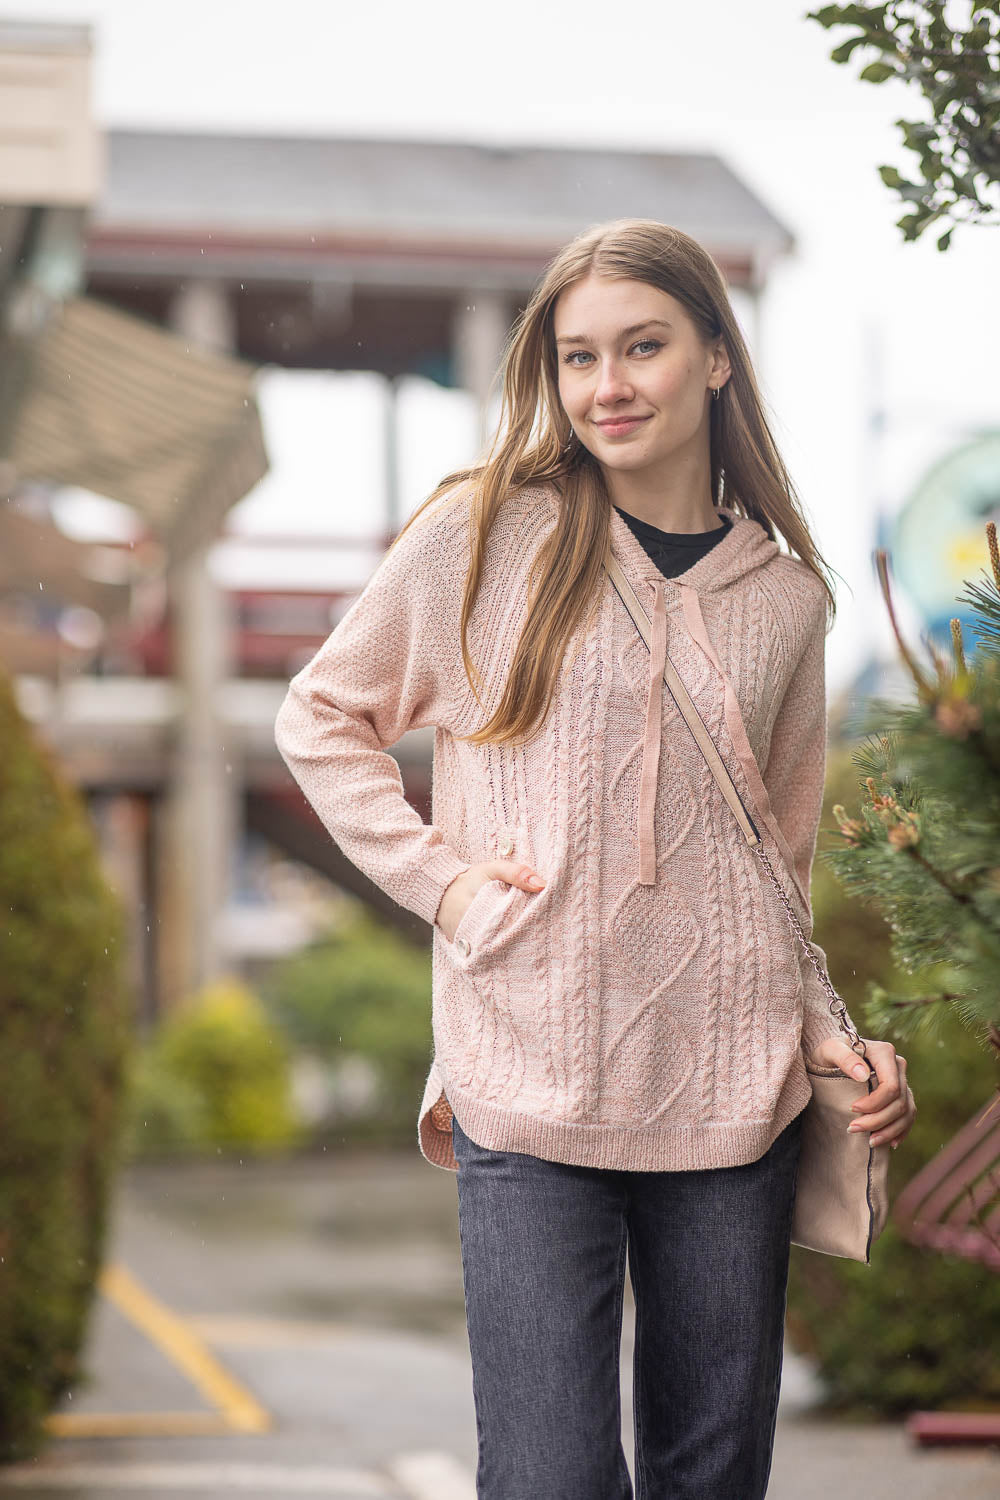 Papillon Top - Cable Knit Hoodie - Blush